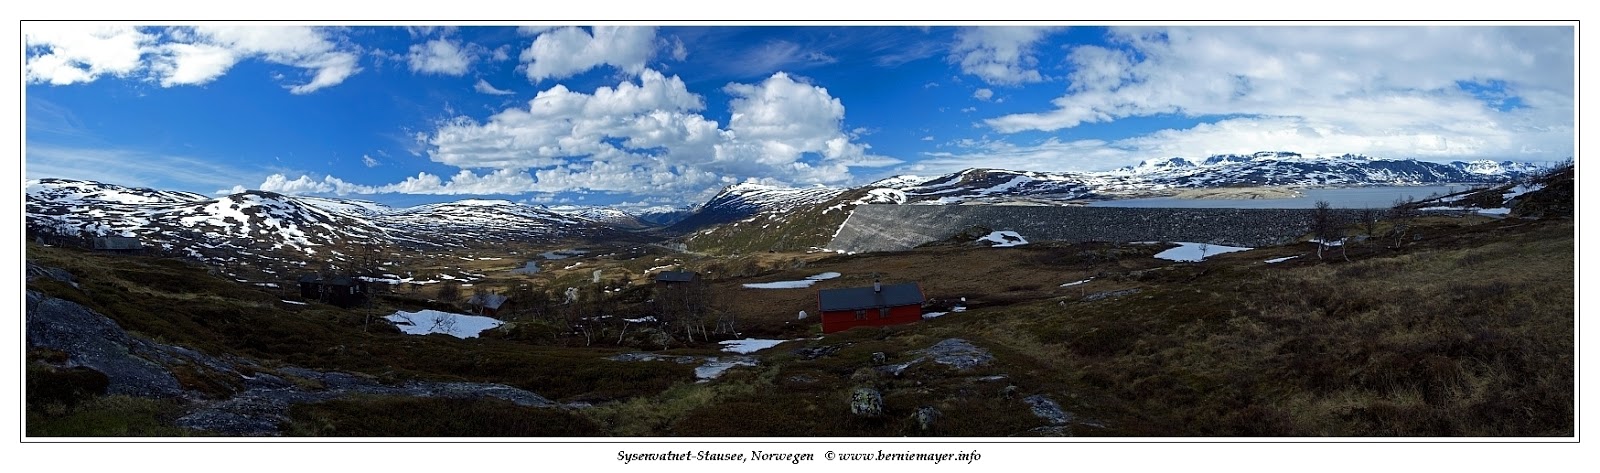 Sysenvatnet Stausee